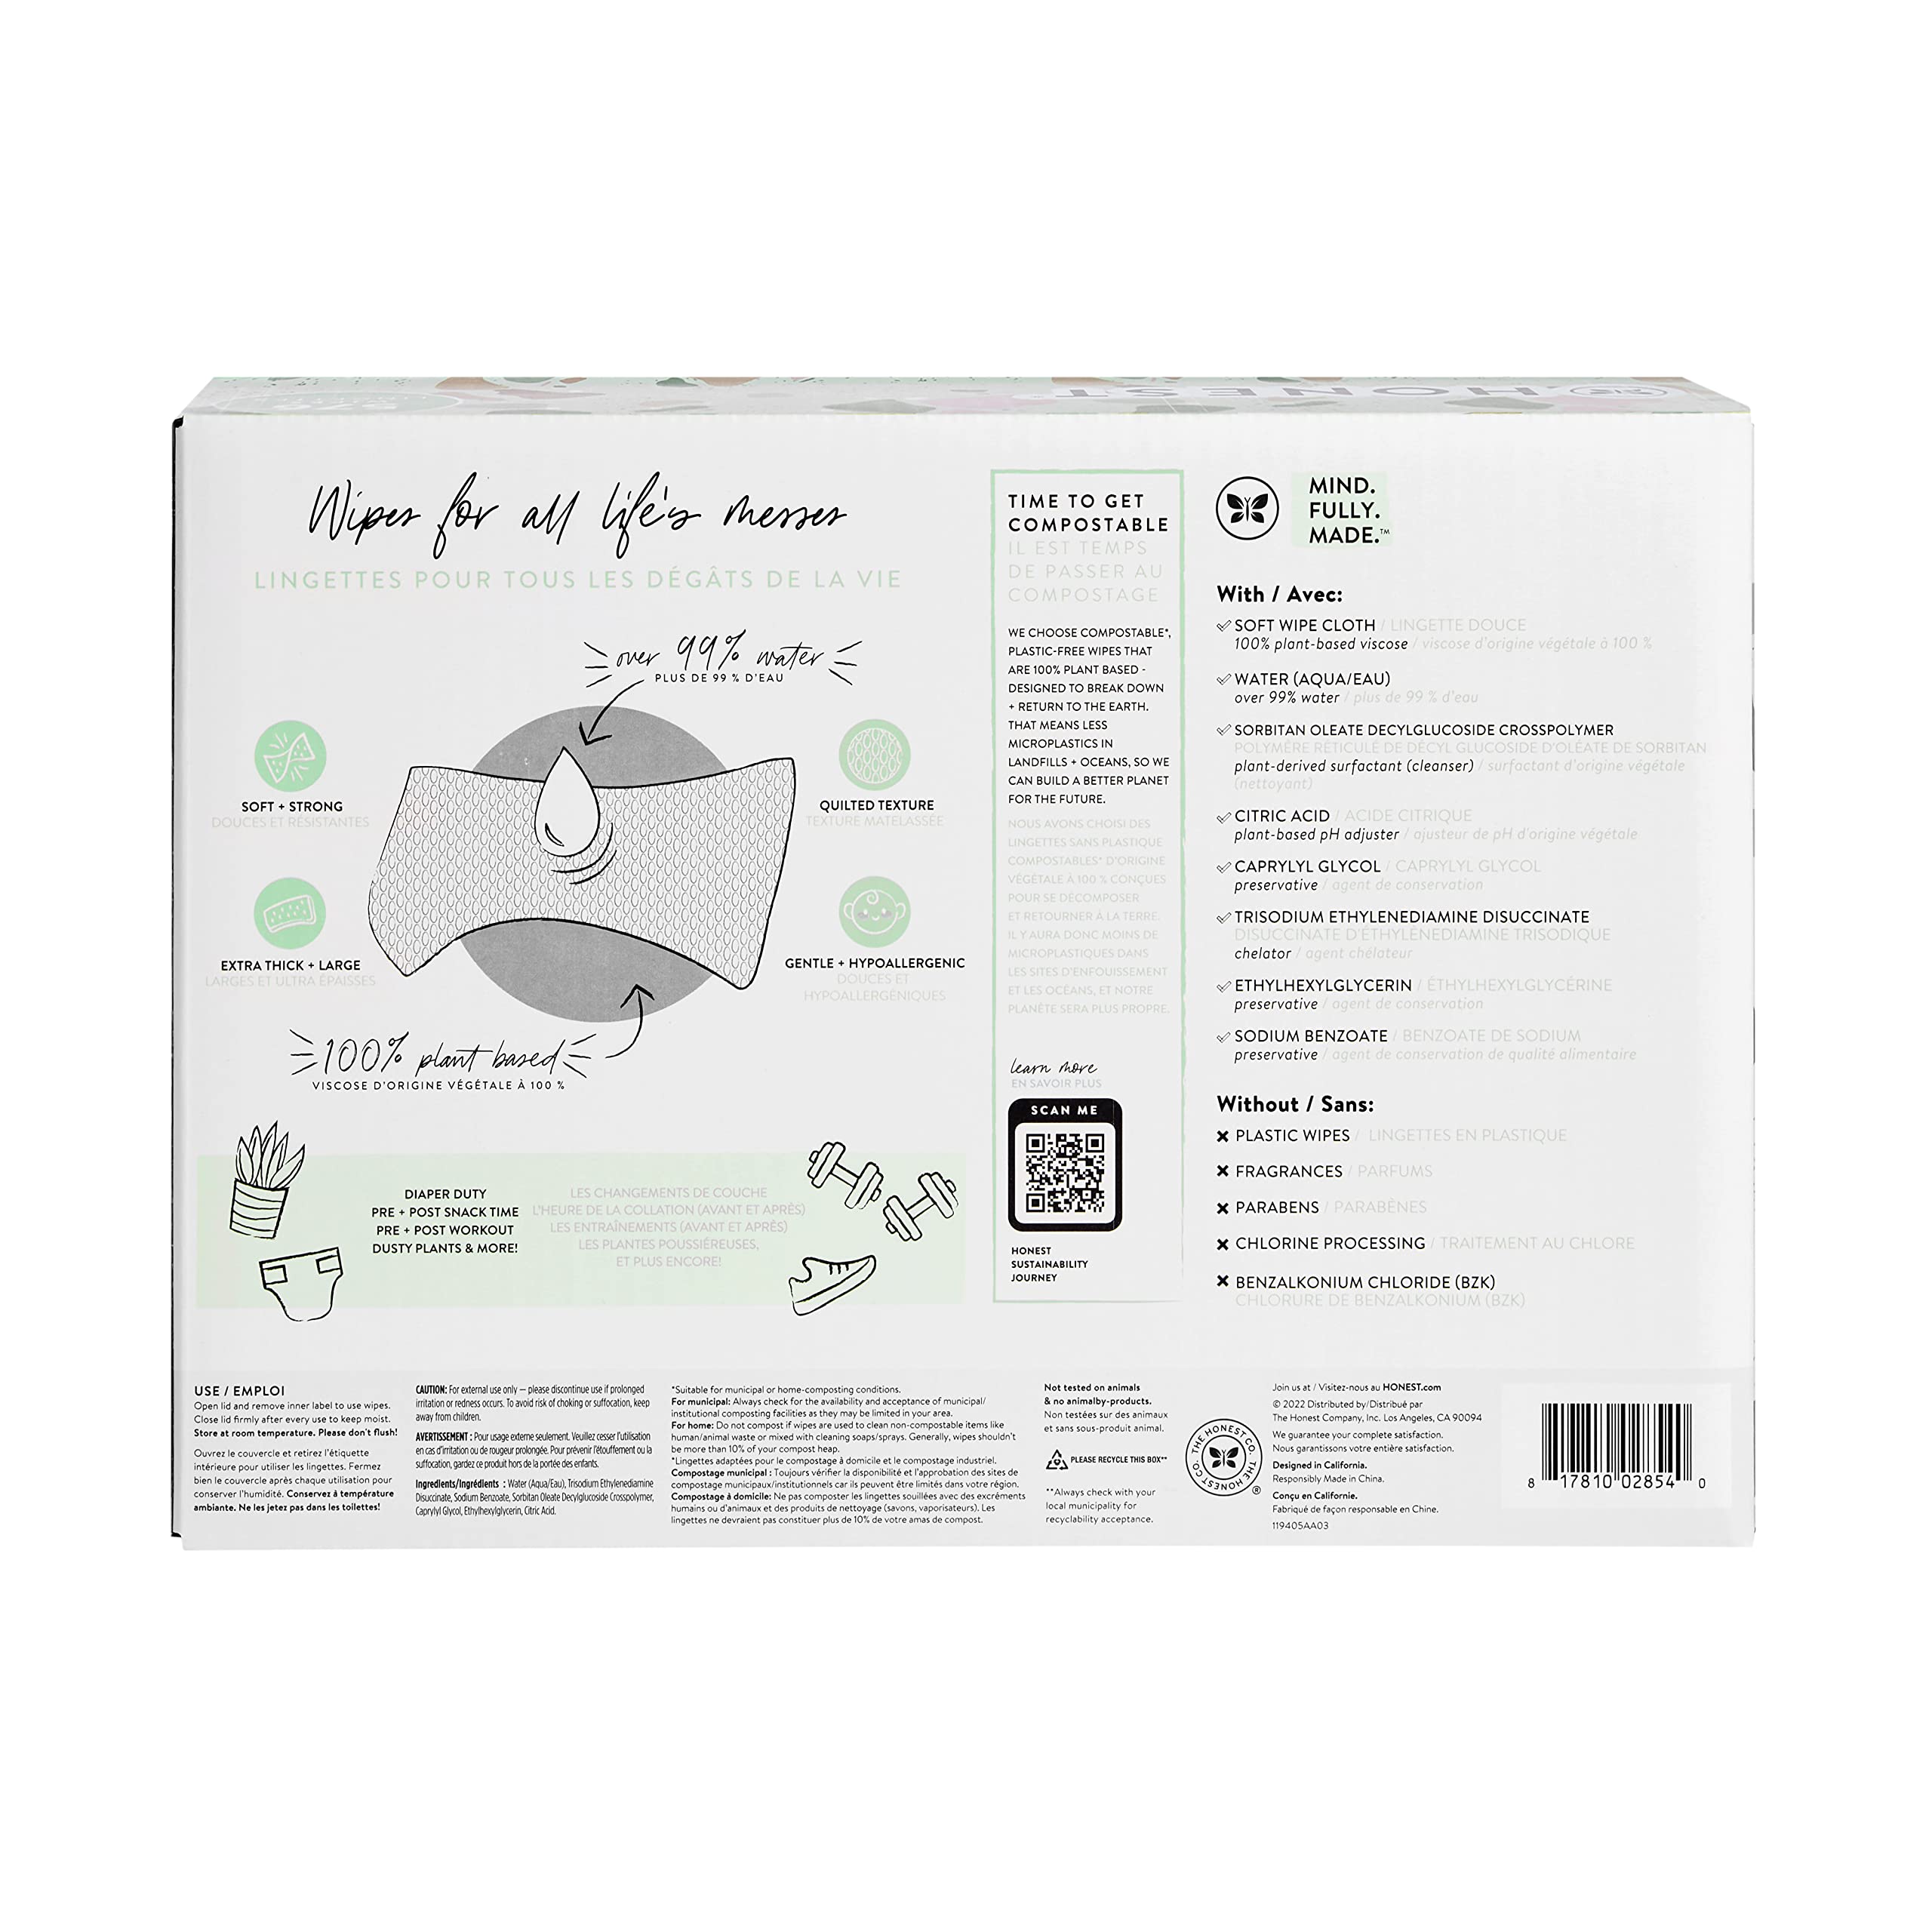 The Honest Company Clean Conscious Wipes | 99% Water, Compostable, Plant-Based, Baby Wipes | Hypoallergenic, EWG Verified | Geo Mood, 72 Count (Pack of 8)